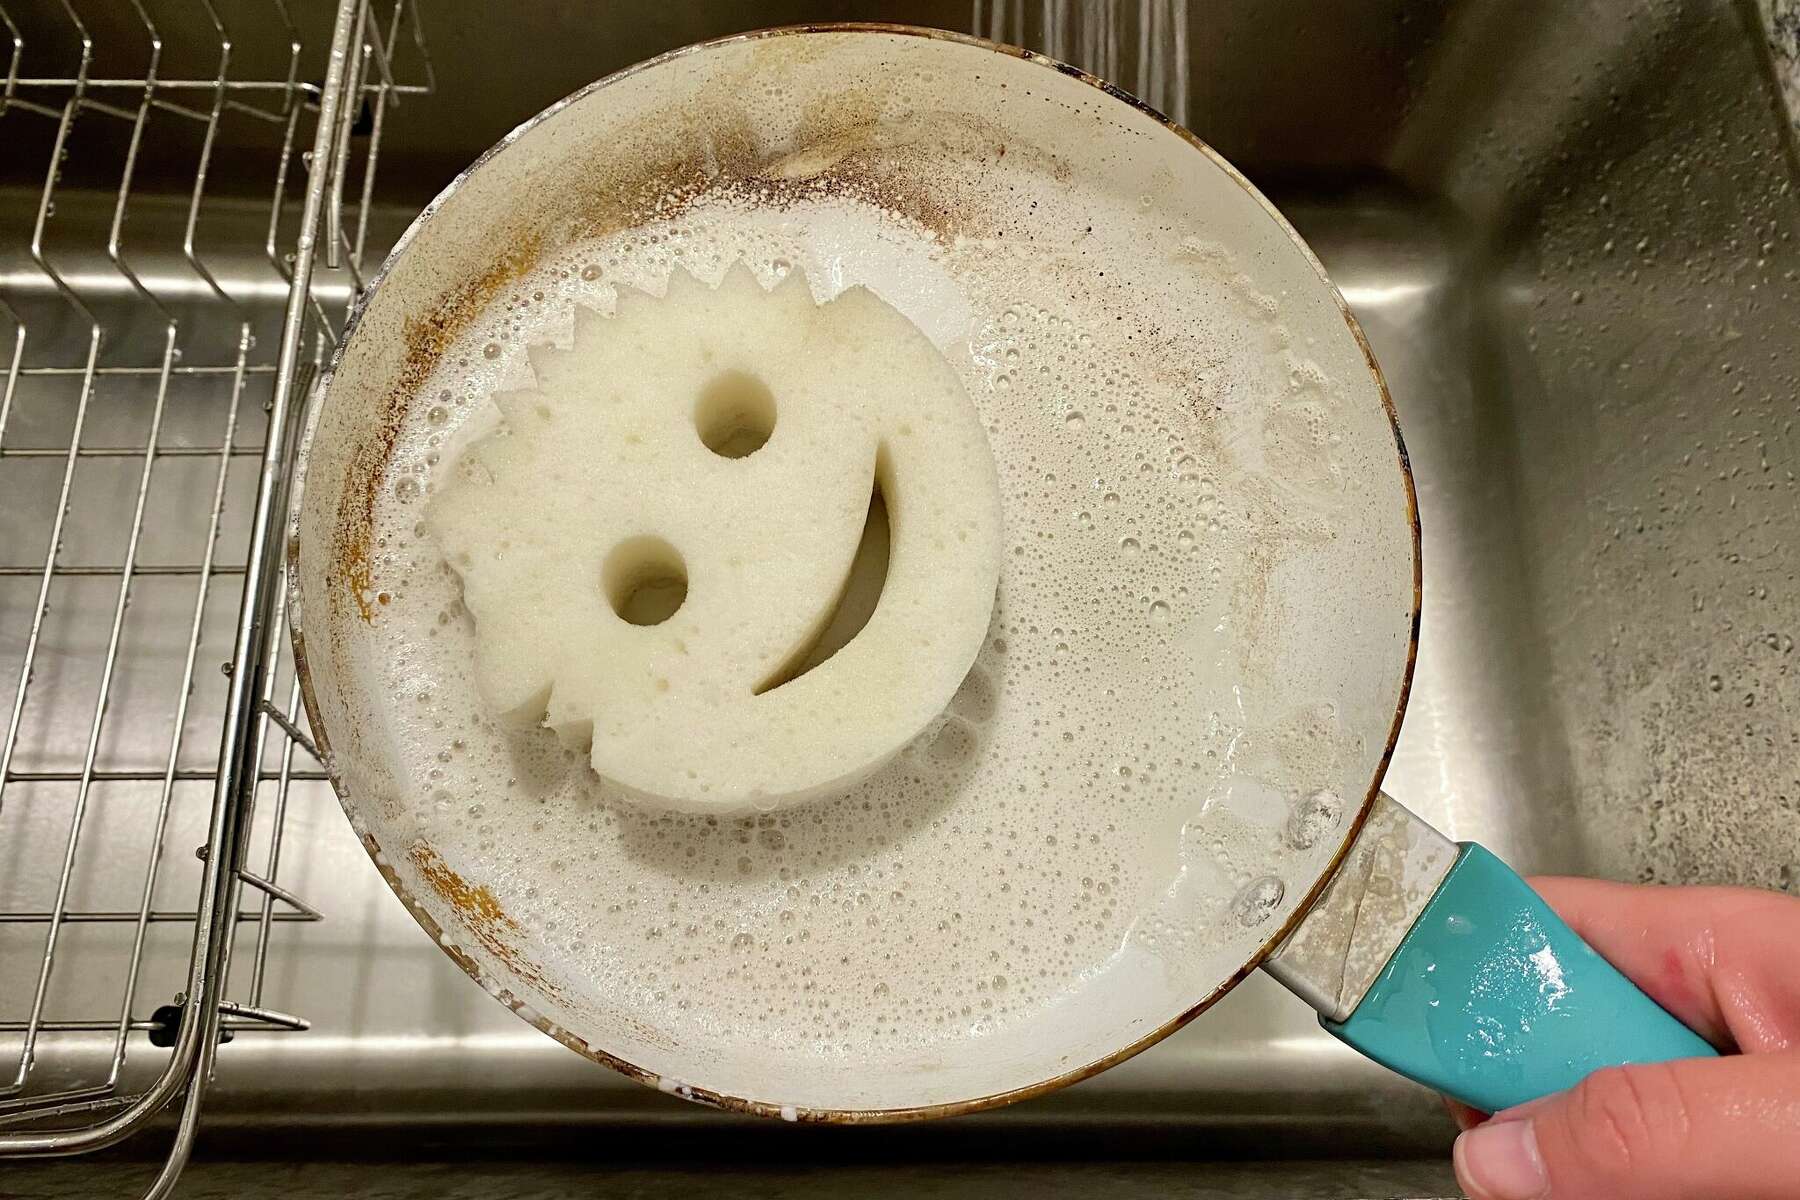 Happy face sponge made a dried happy face in the pan I didn't finish  washing last night. : r/mildlyinteresting